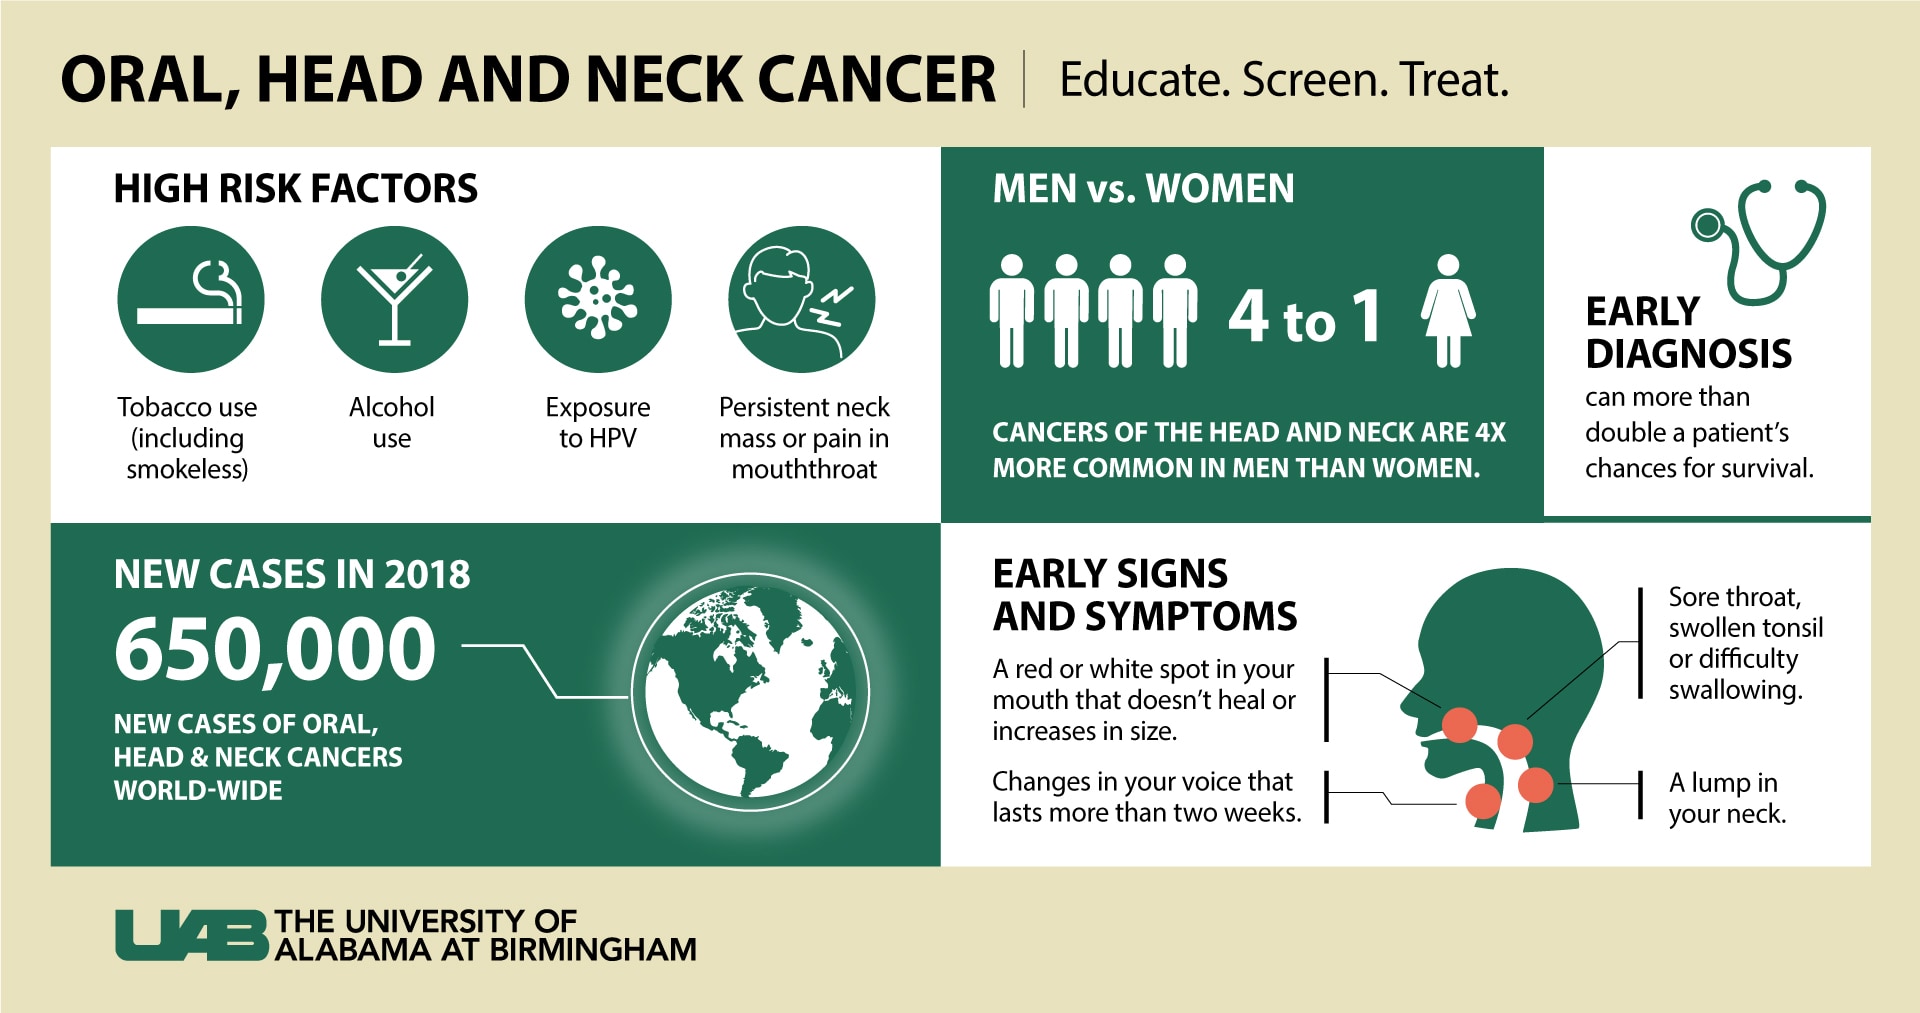 Sports Figures – Oral Cancer Foundation  Information and Resources about  Oral Head and Neck Cancer